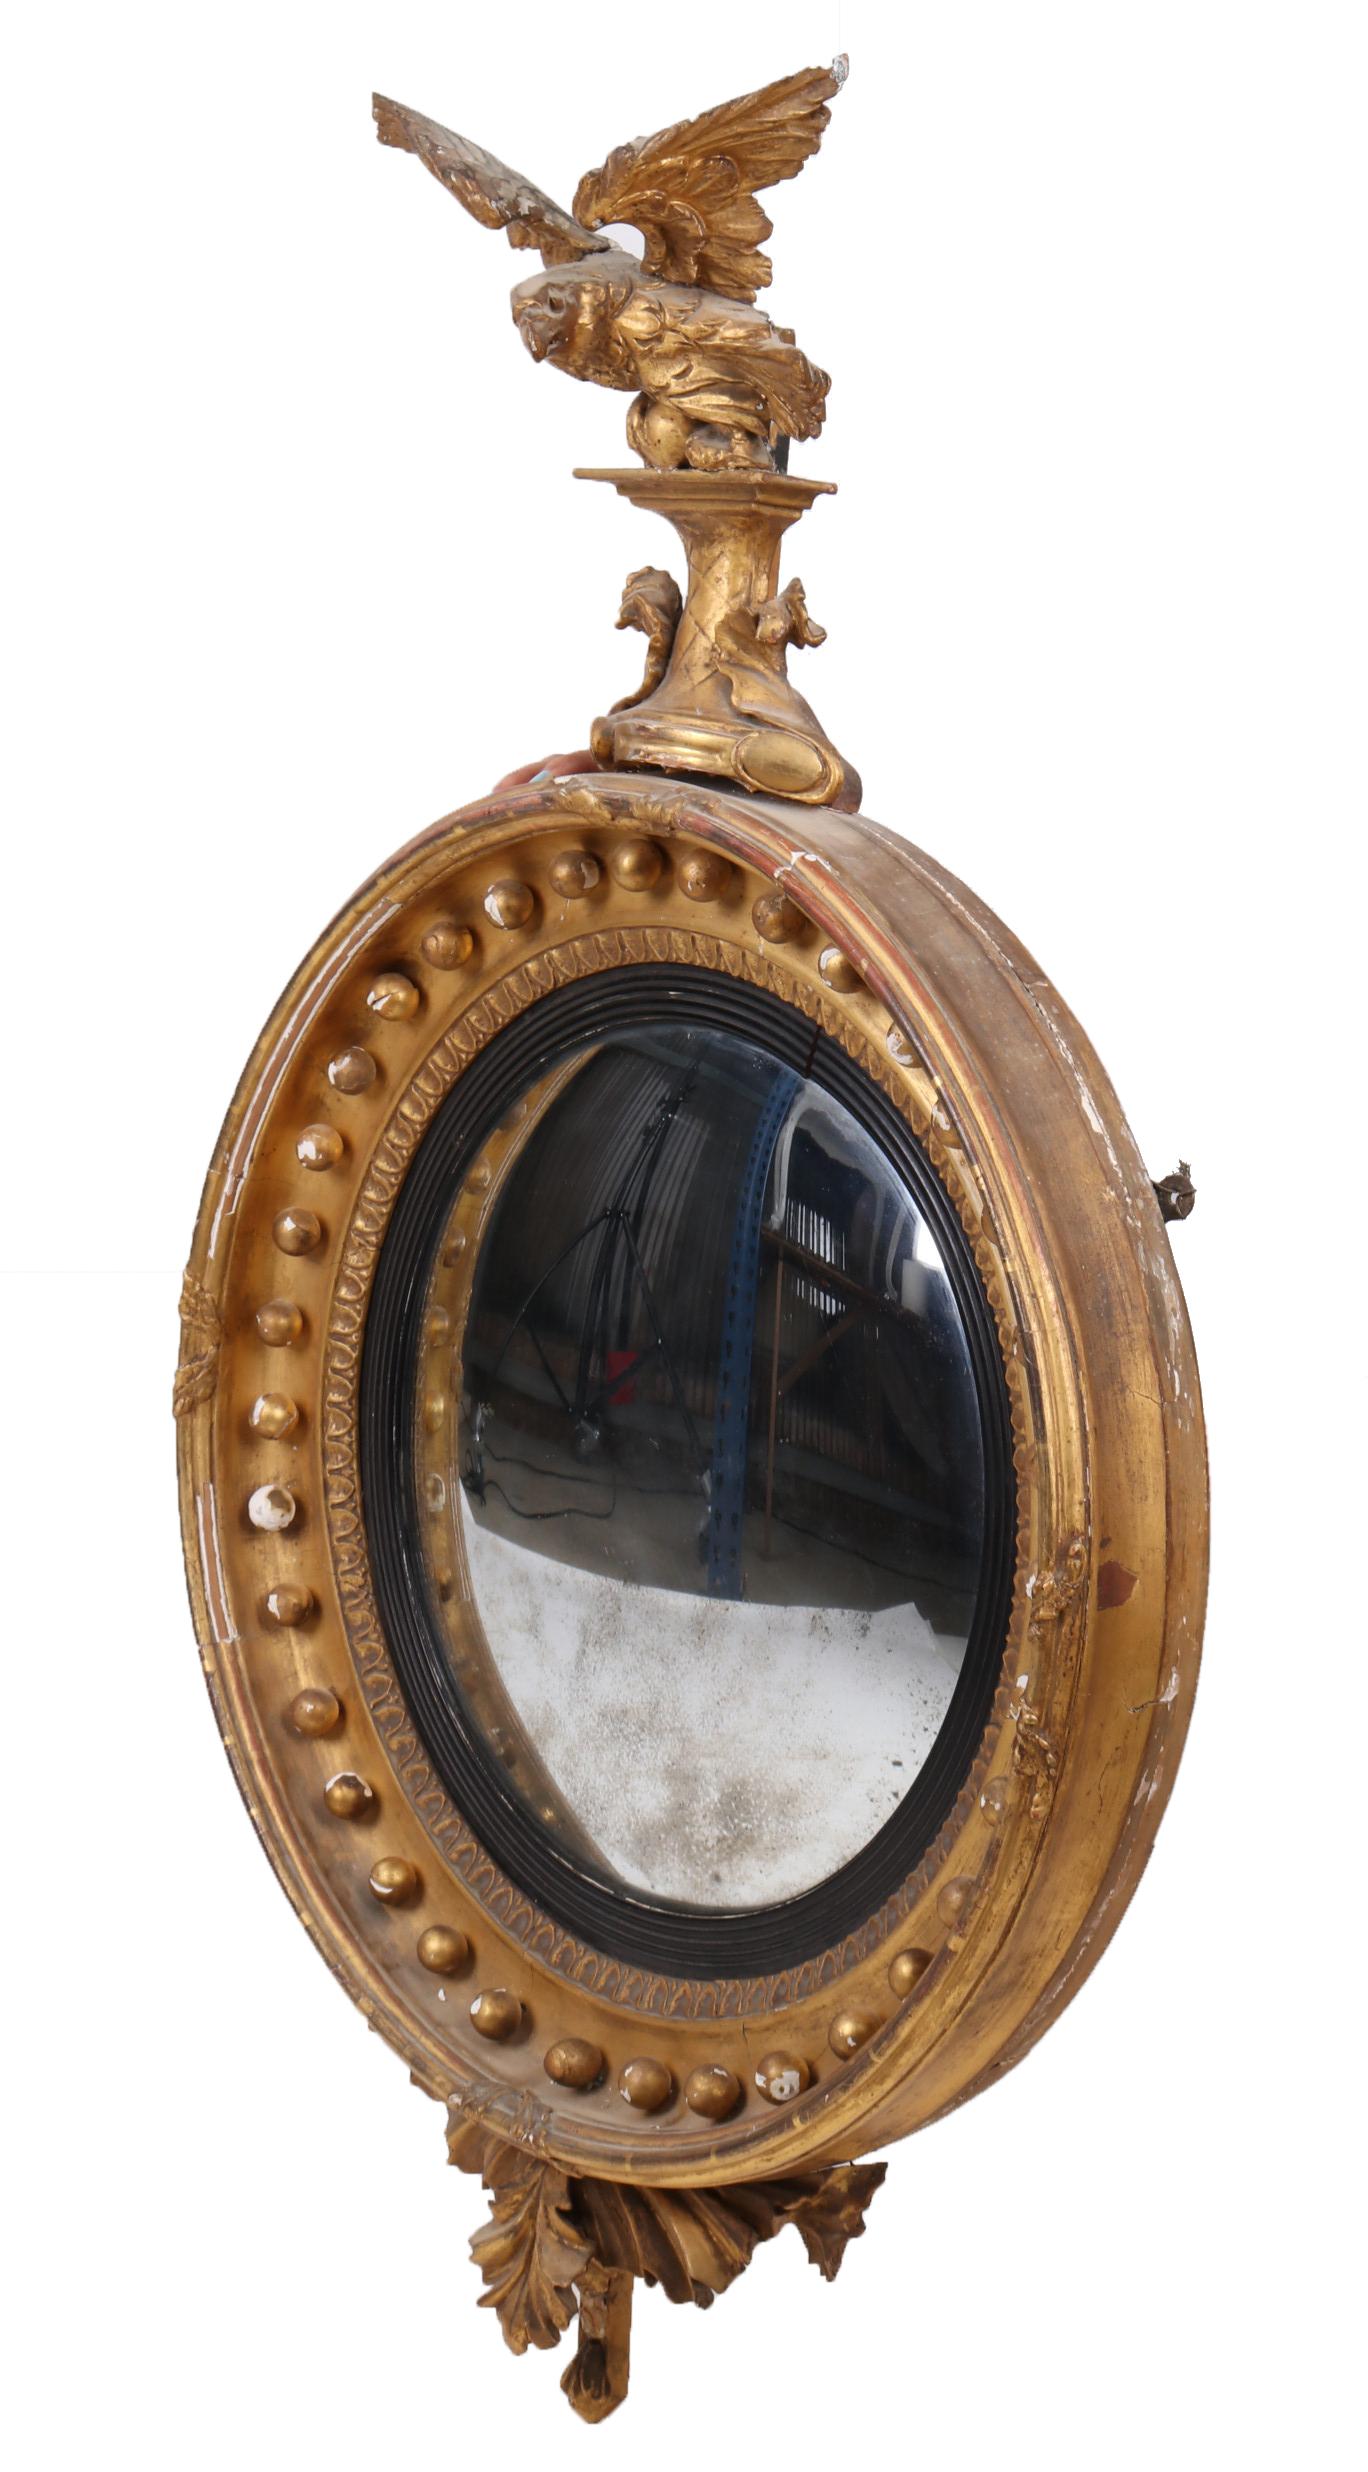 18th century French golden Regency convex mirror topped by an eagle.